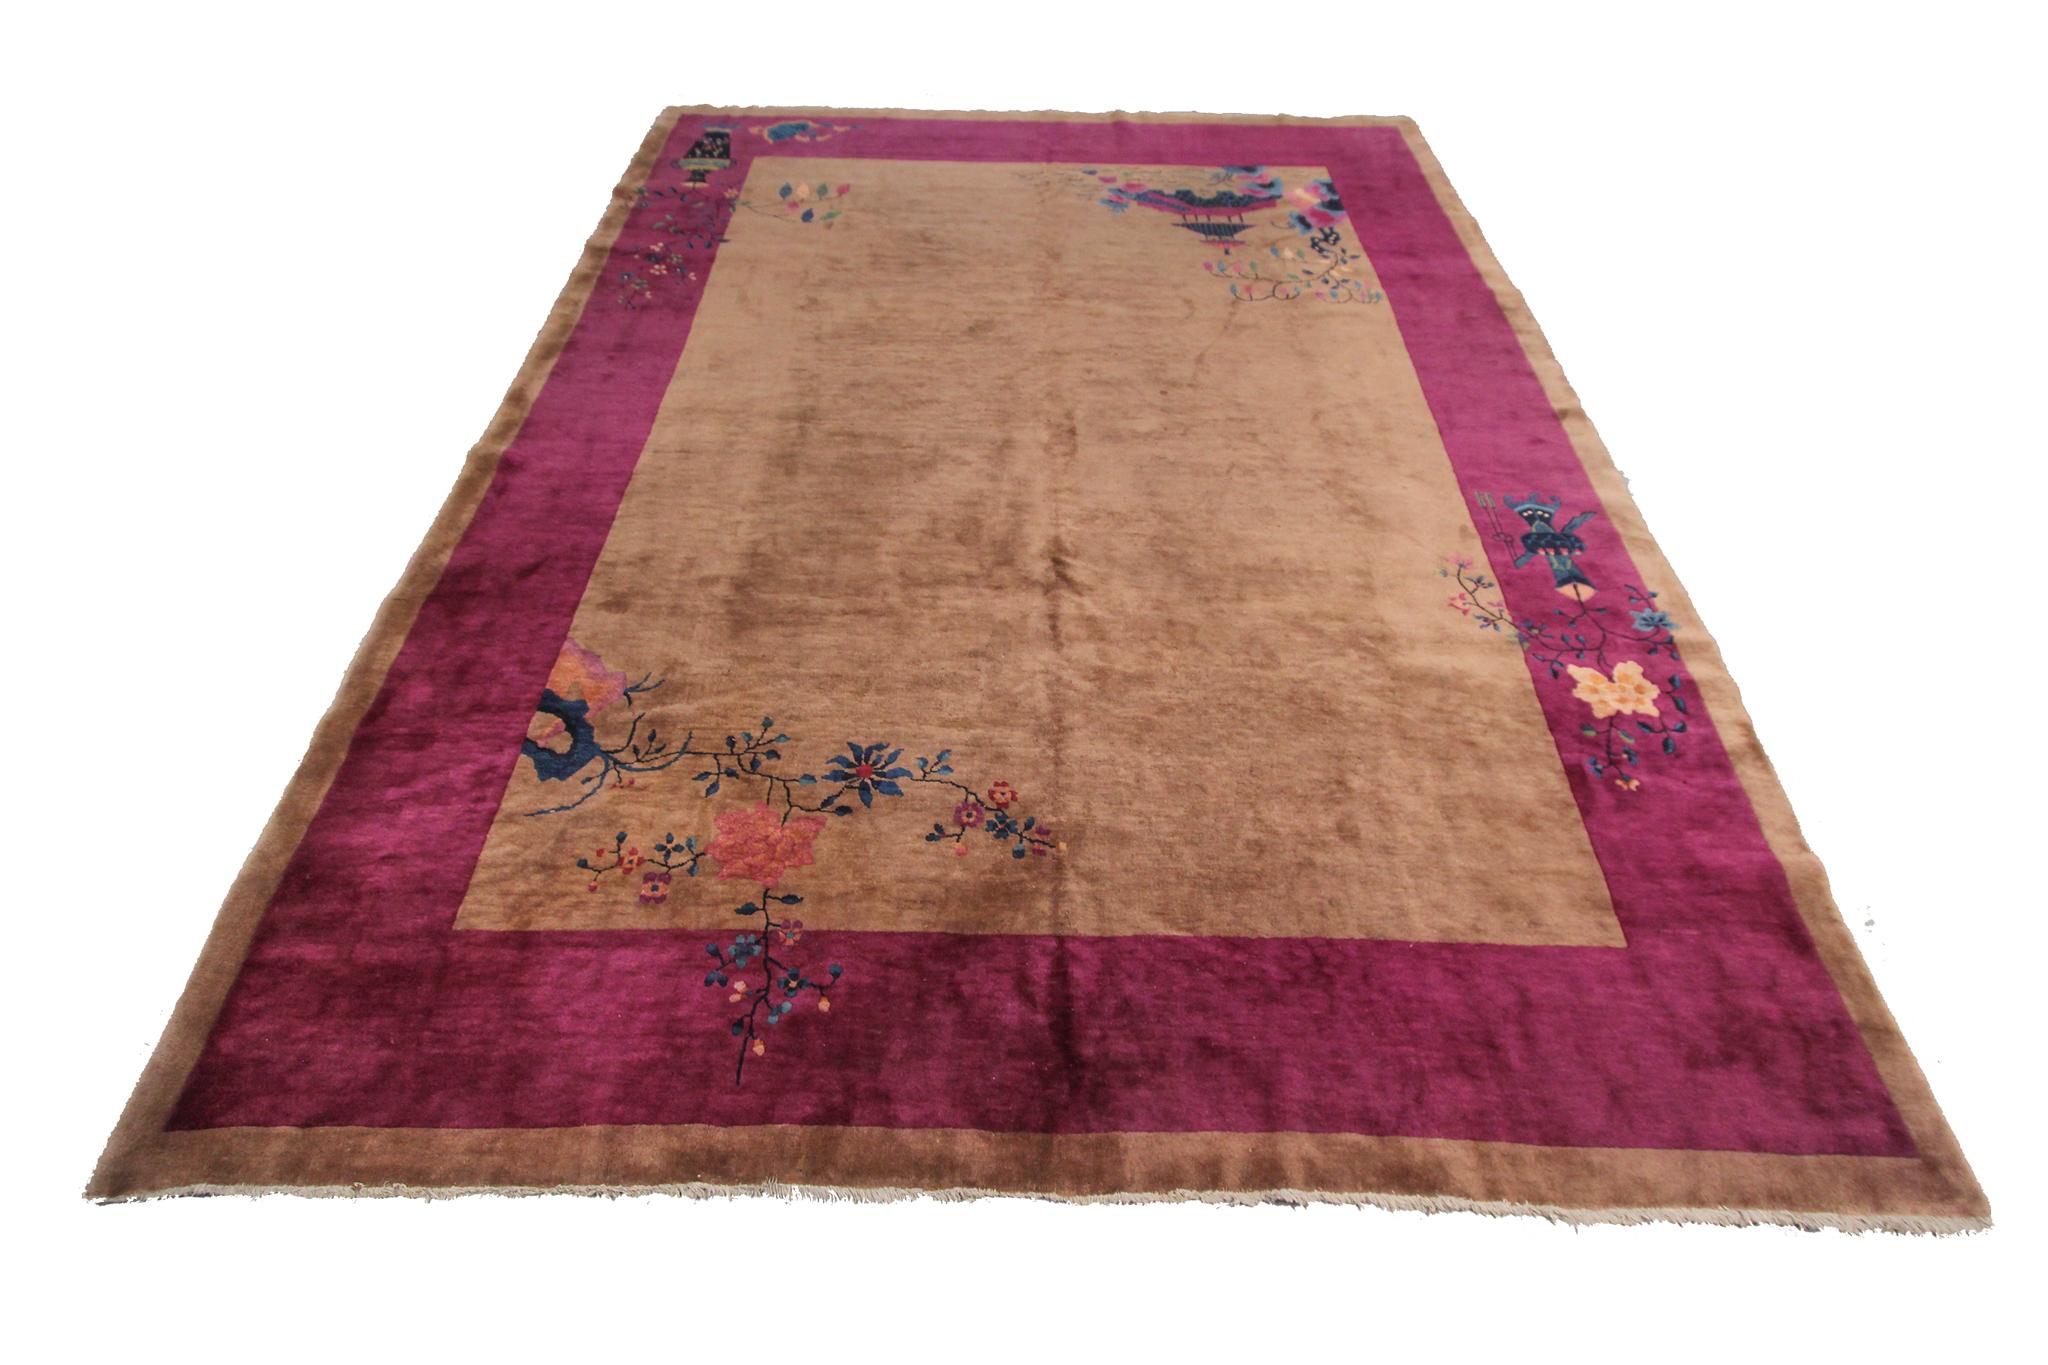 Hand-Knotted Antique Art Deco Rug Antique Chinese Walter Nichols Rug 1920 9x12 277cm x 348cm For Sale